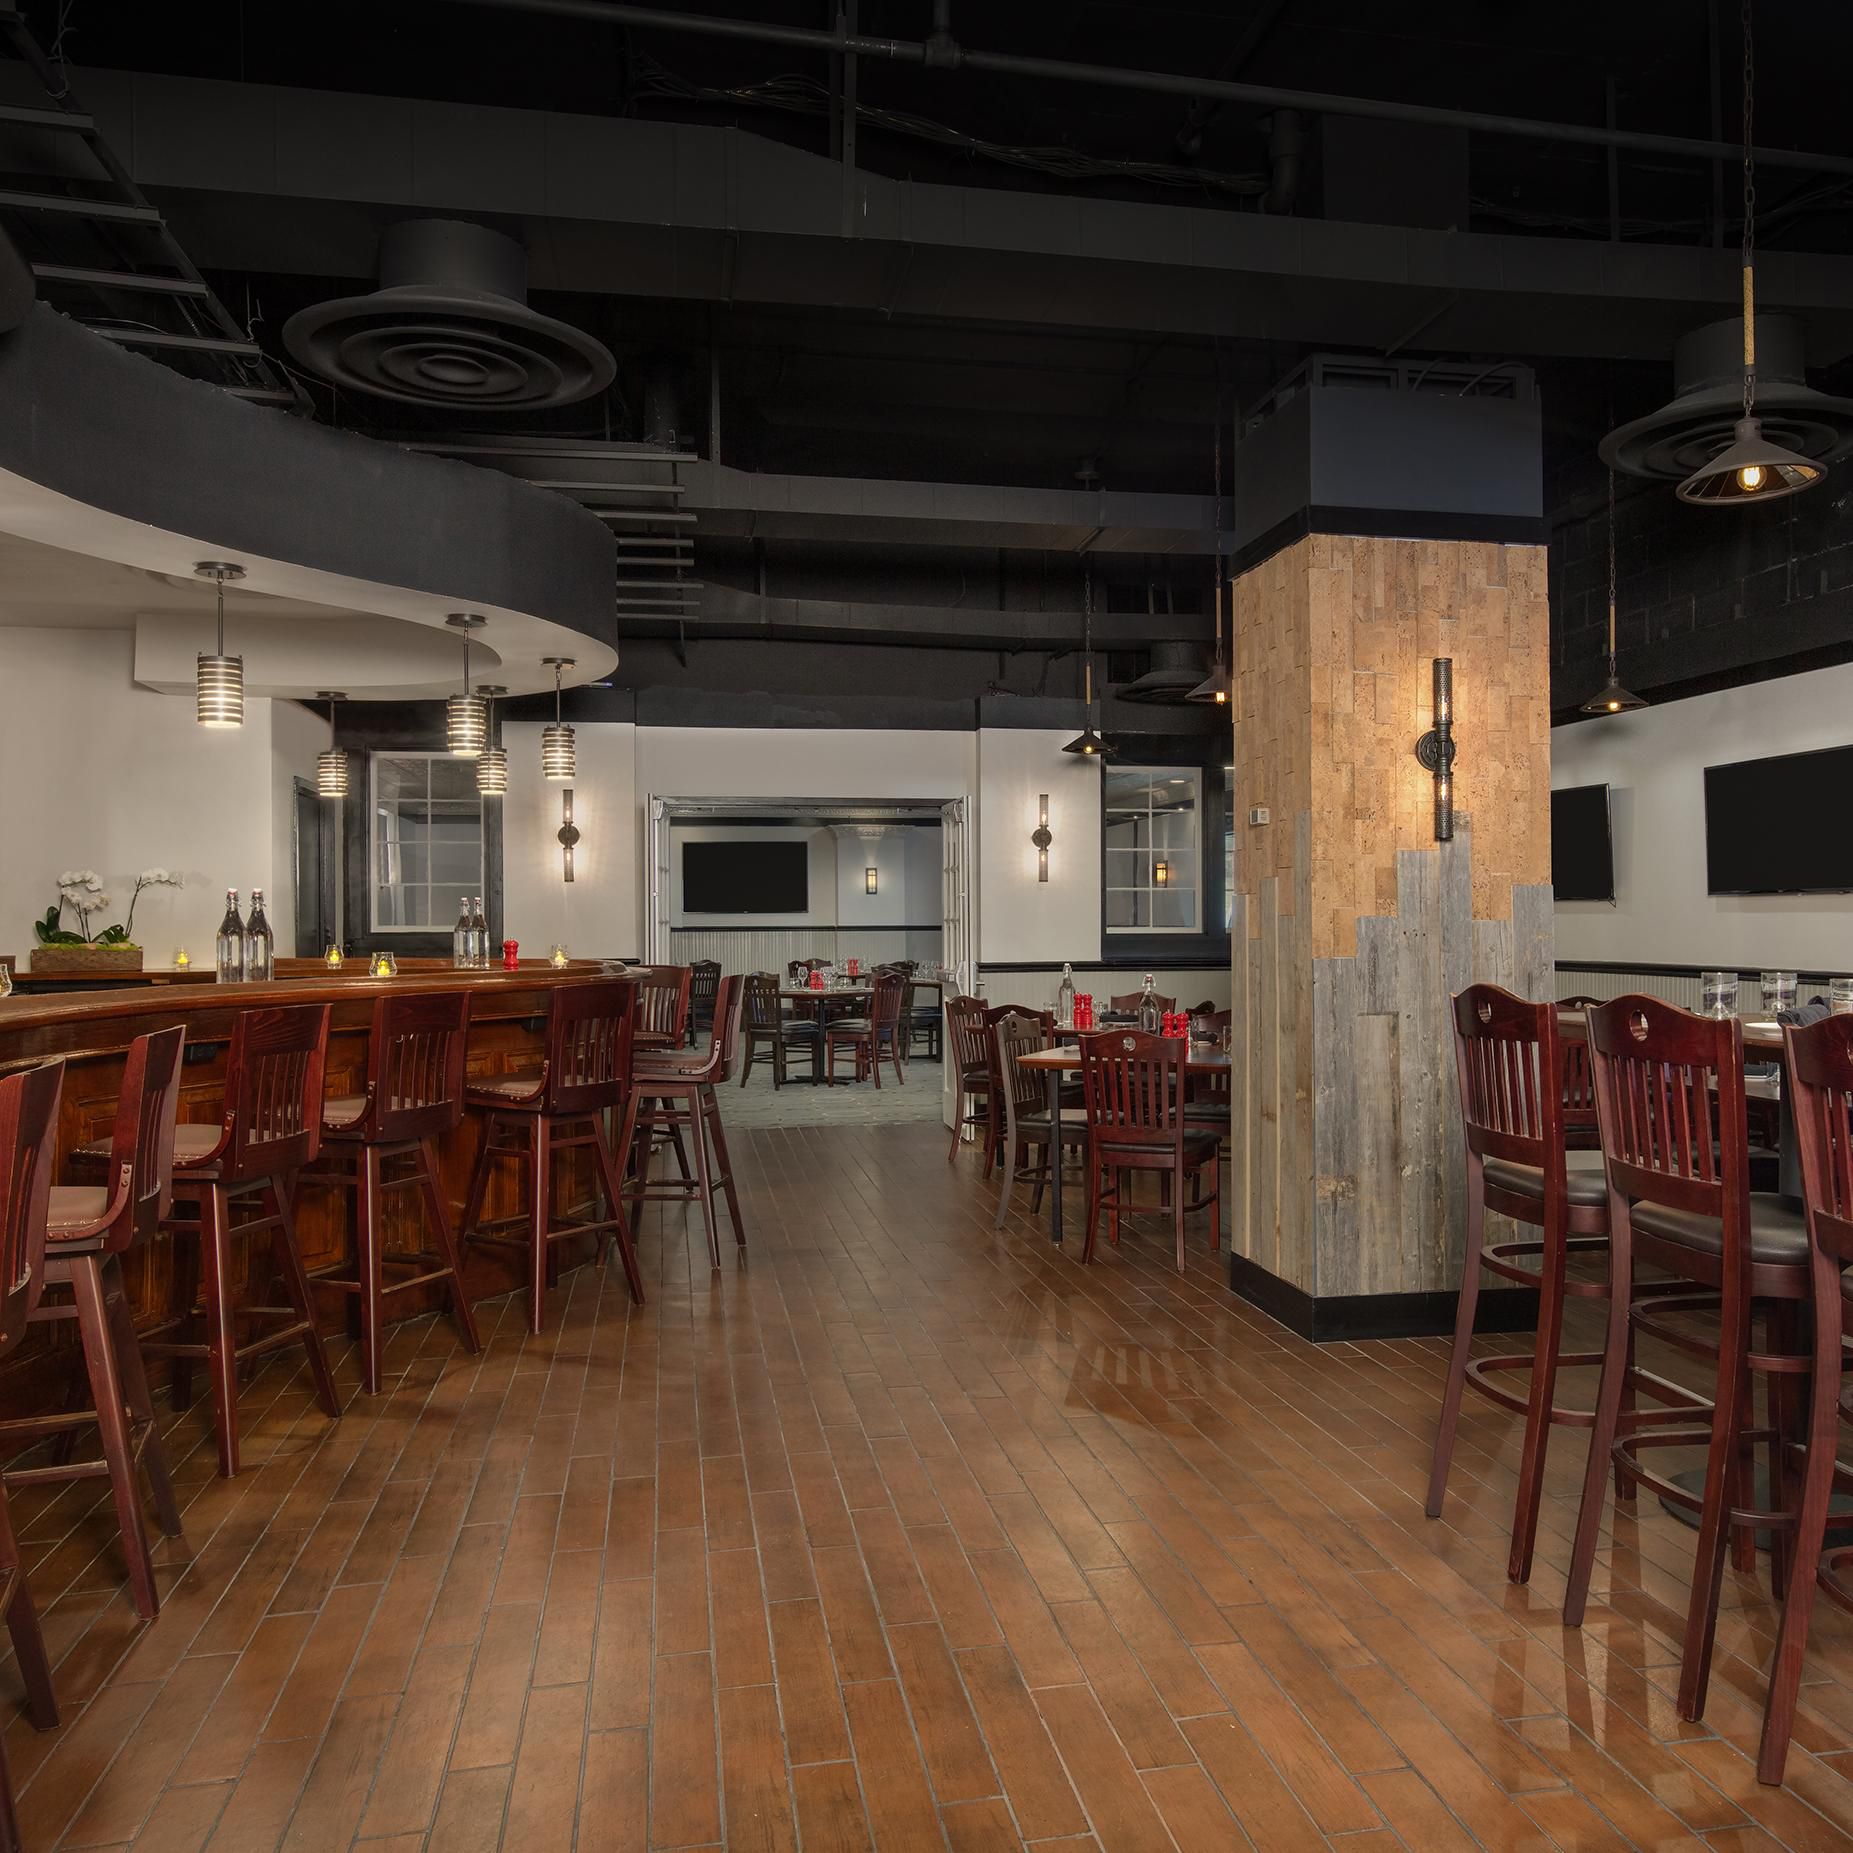 Potomac Social Tavern offers diners plenty of well-spaced seating.